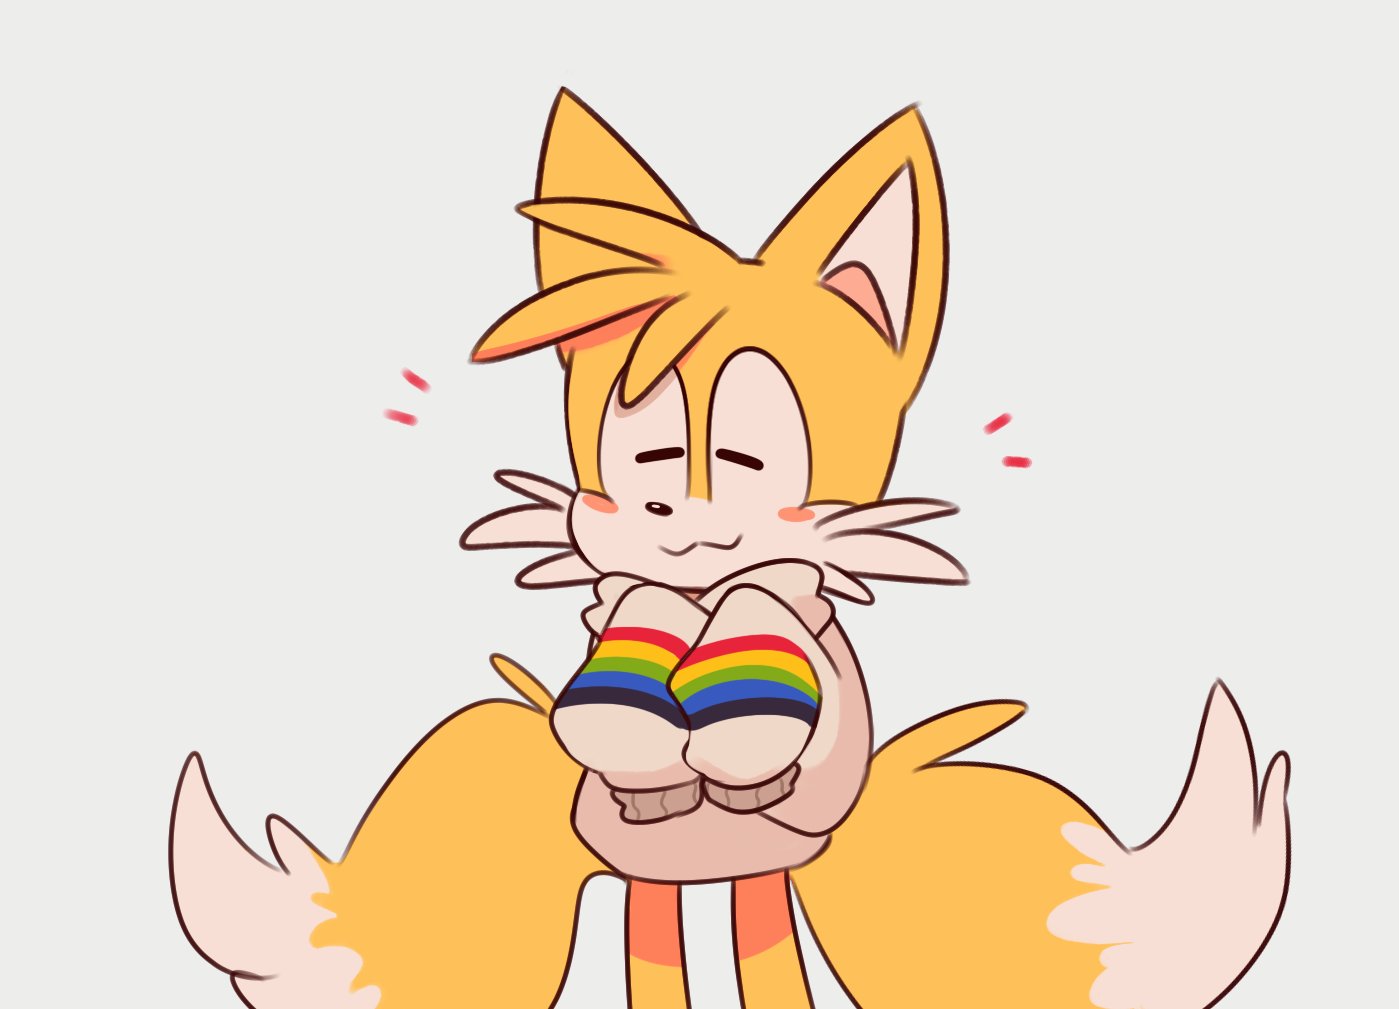 real tails hours on Twitter.